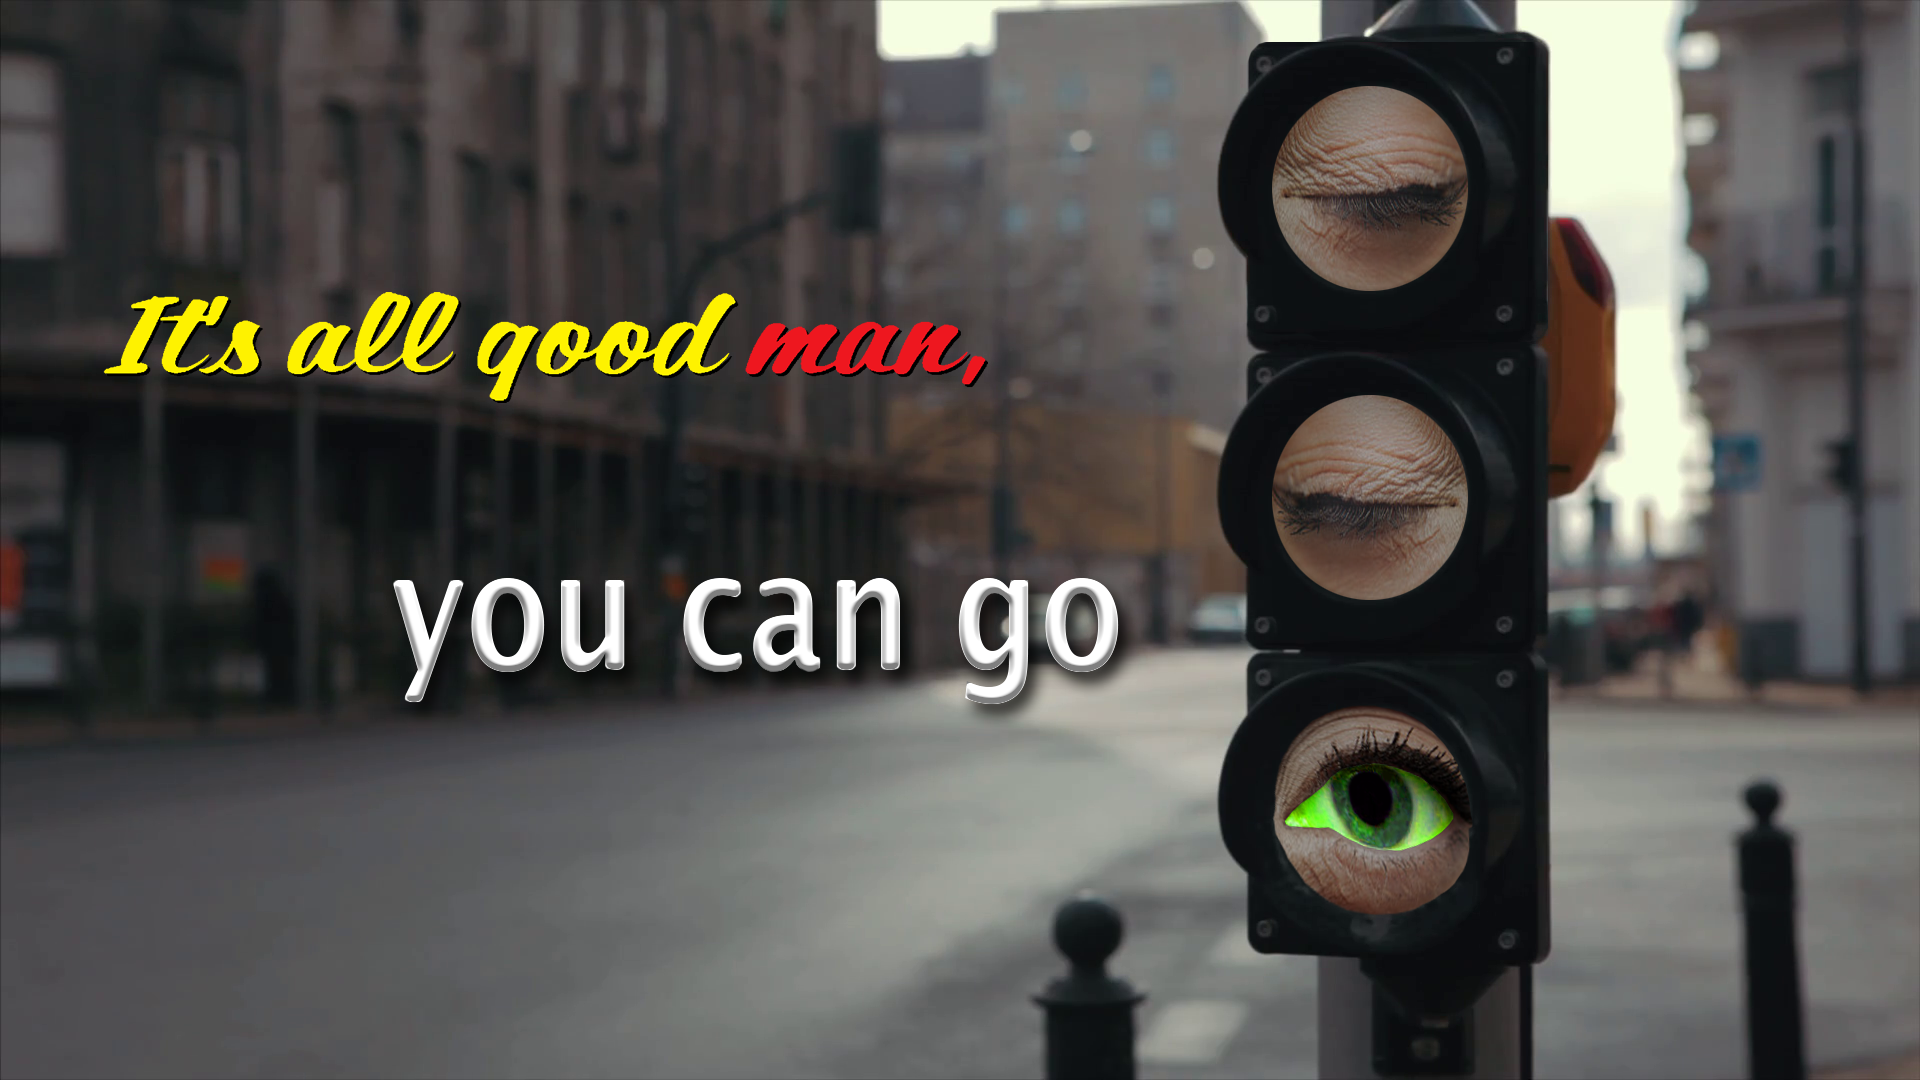 traffic light - It's all good man, you can go